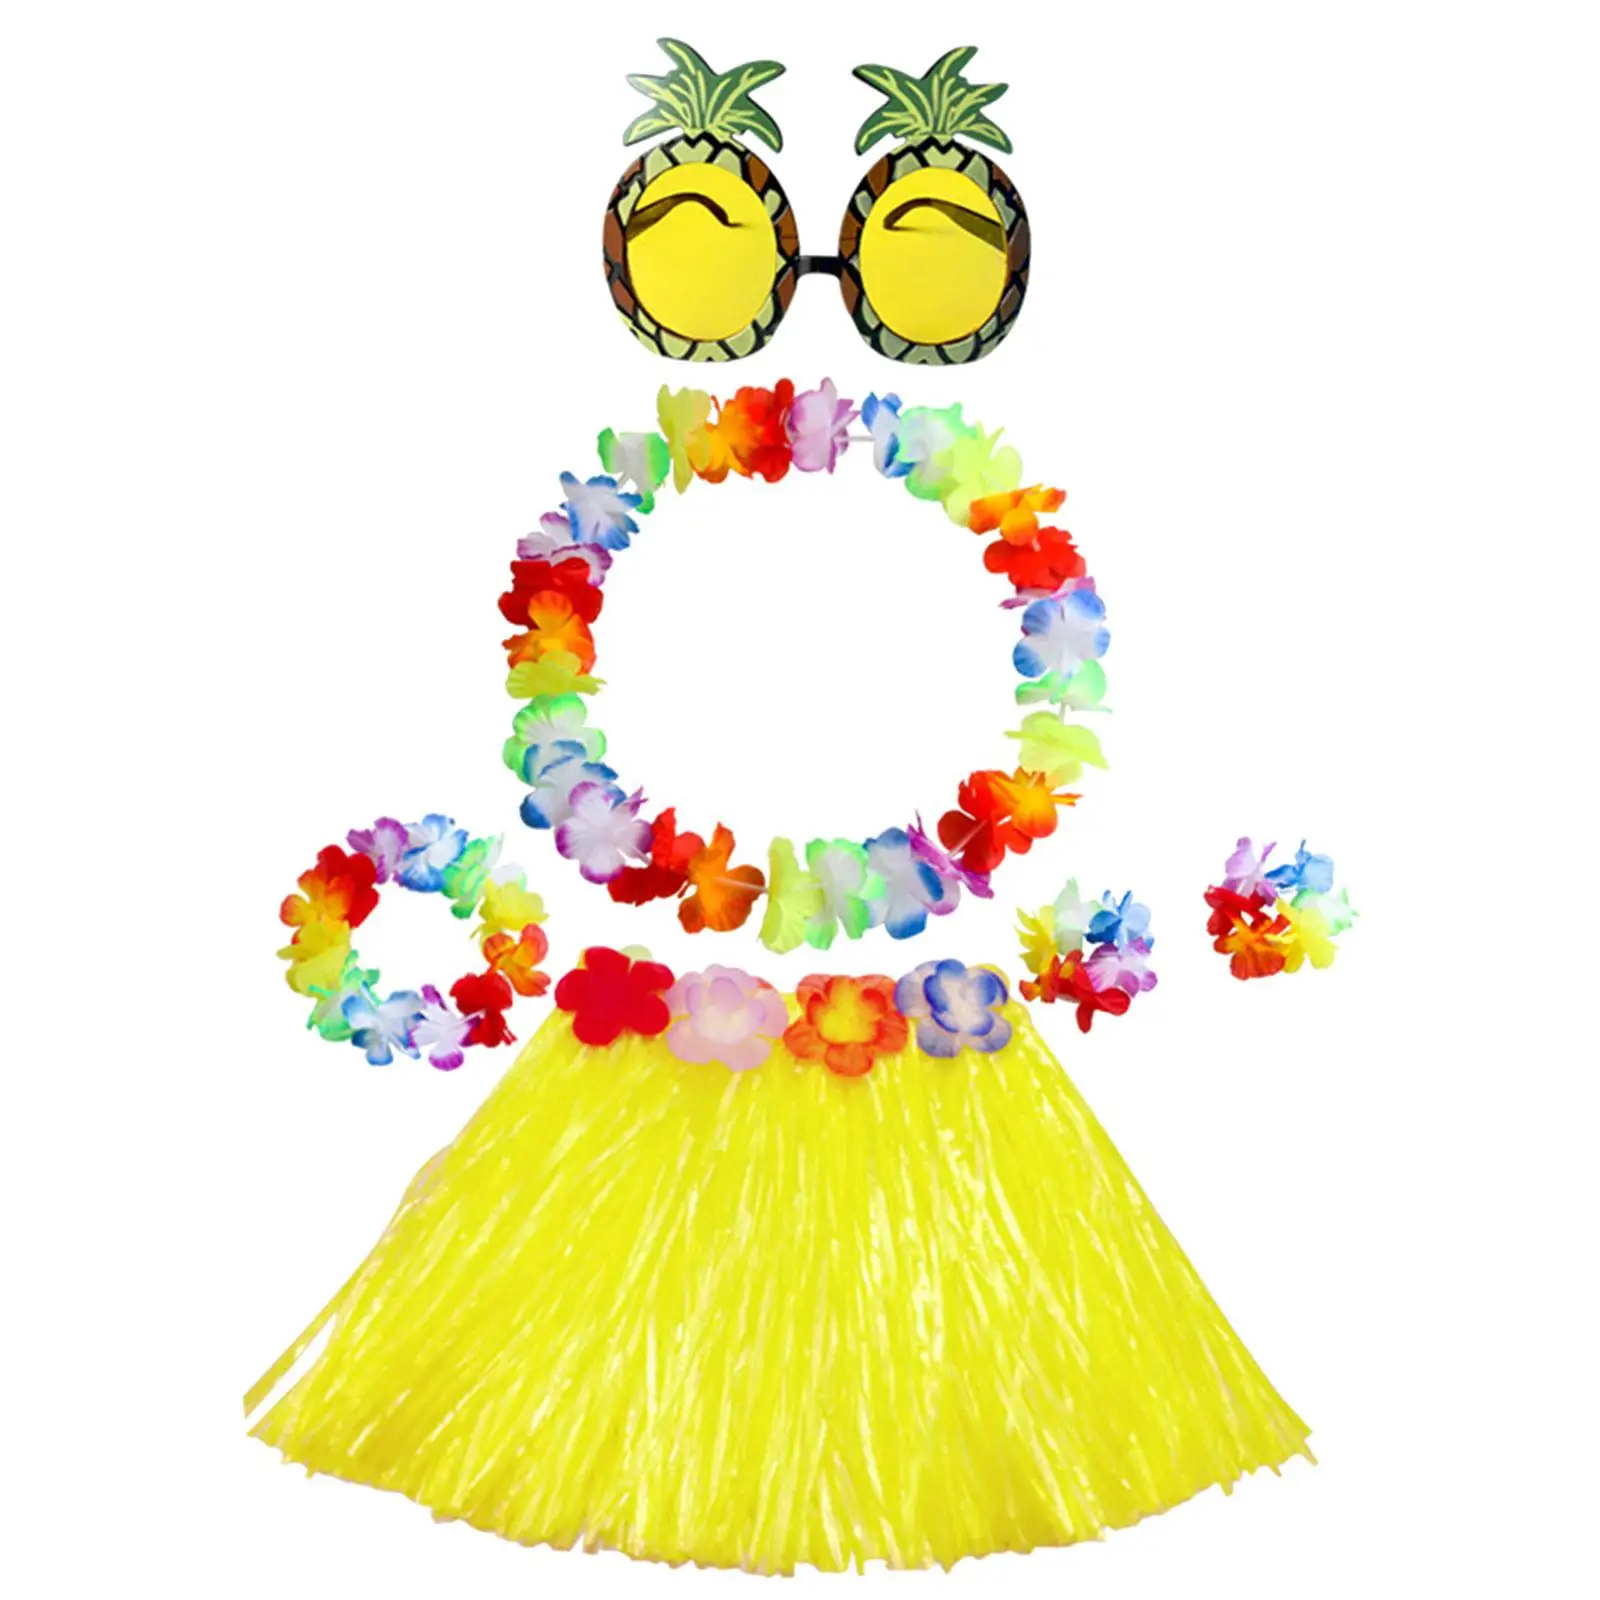 Girls Hawaiian Grass Skirt Novelty Necklace Costume Fancy Dress Pineapple Glasses for Party Favors